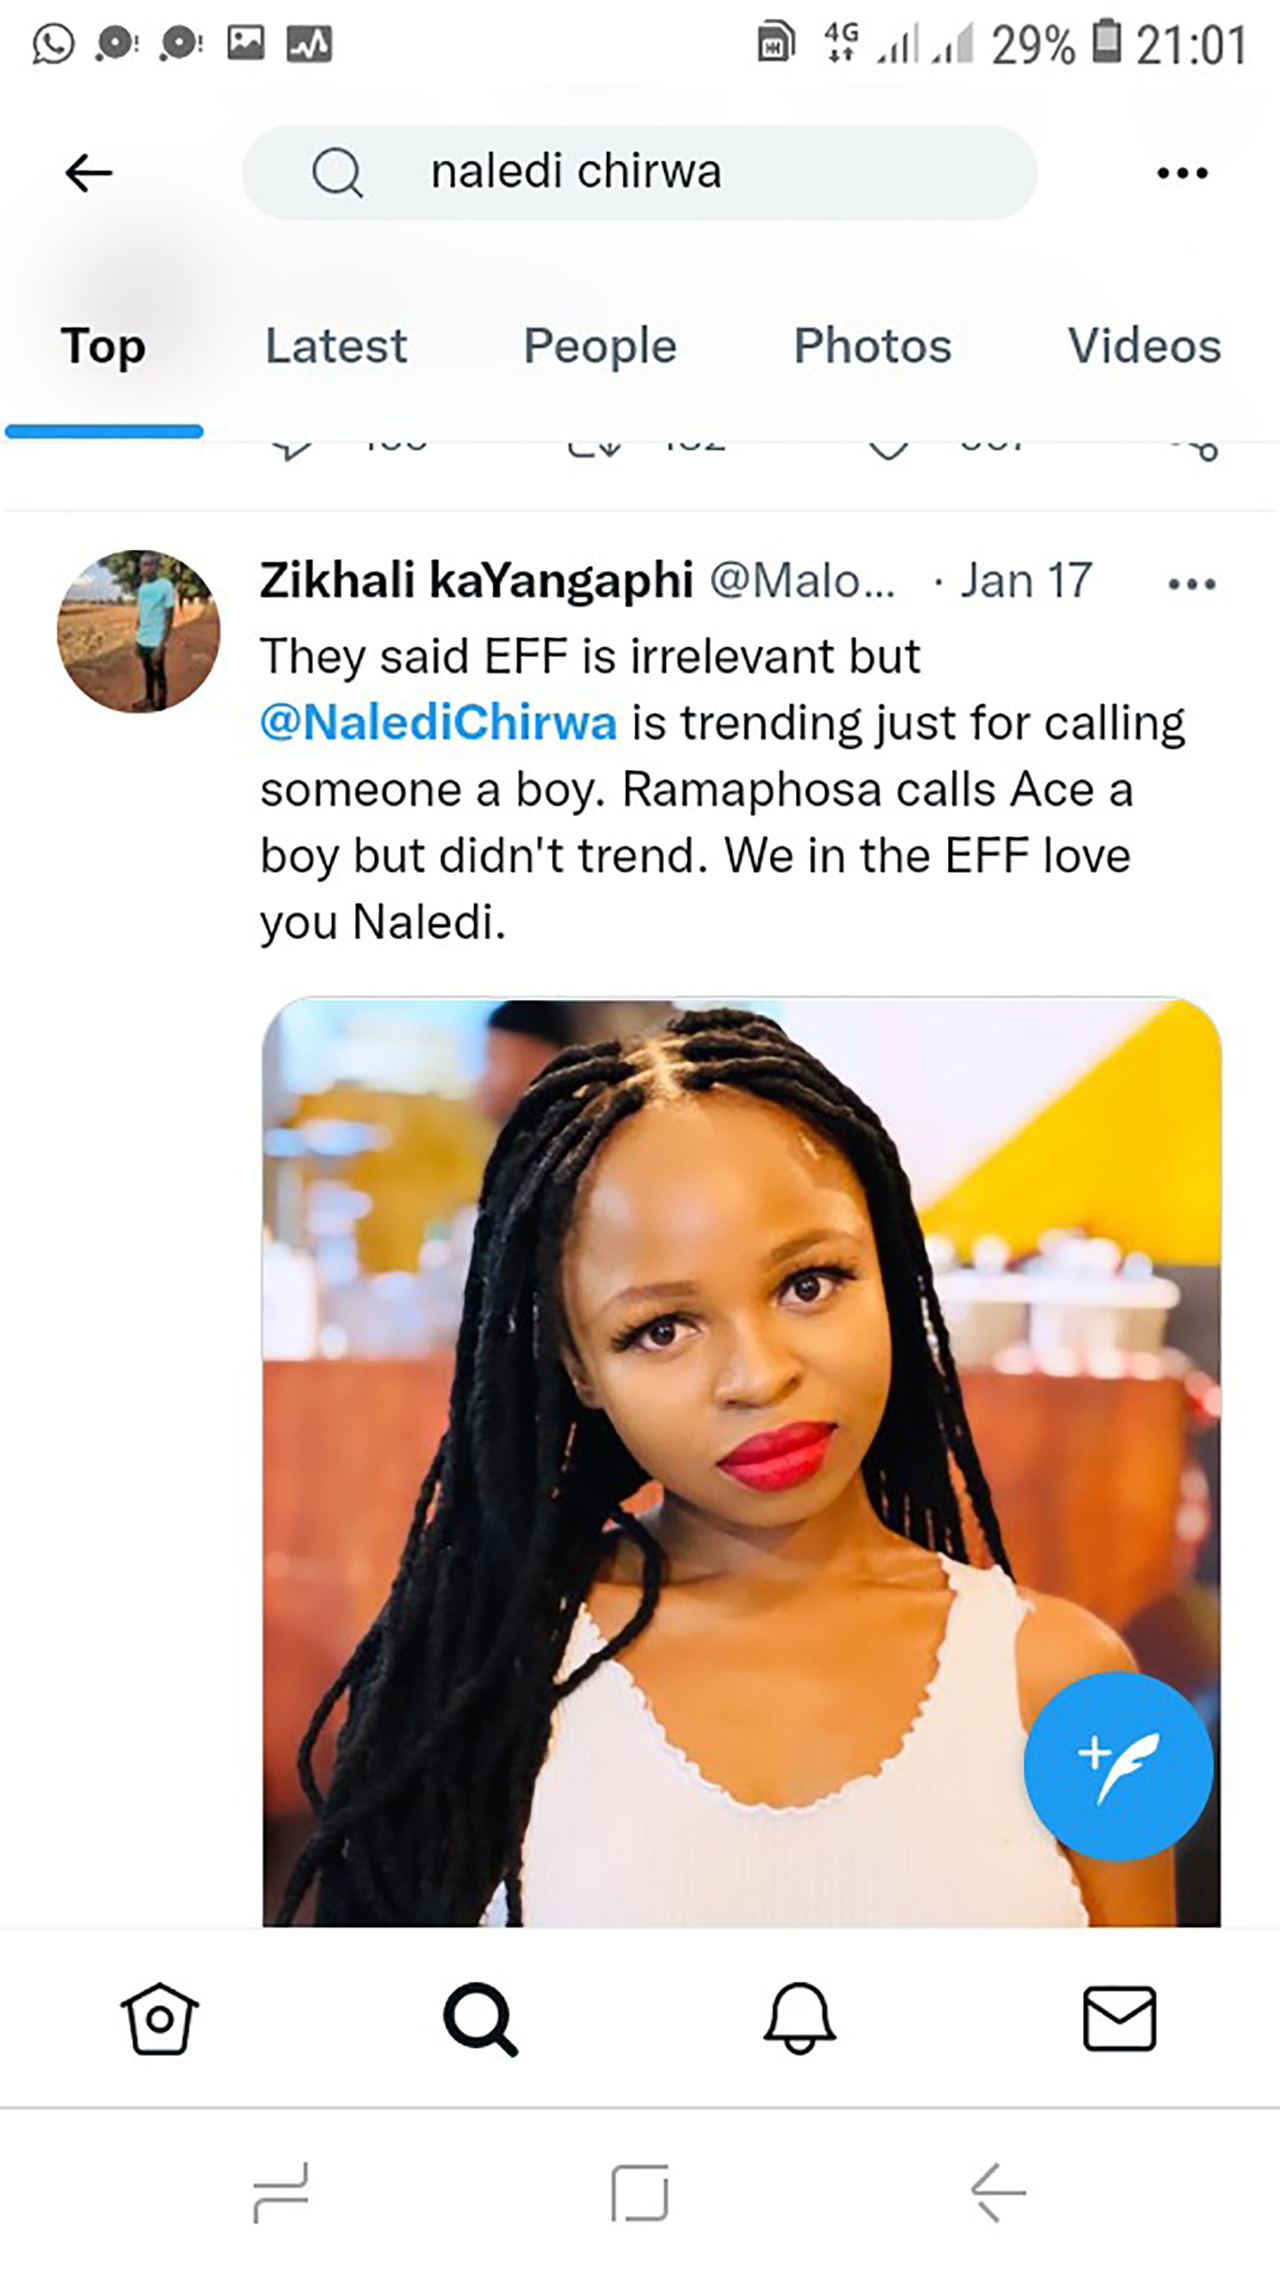 She is a foreigner insulting our president: Mzansi reacts 4